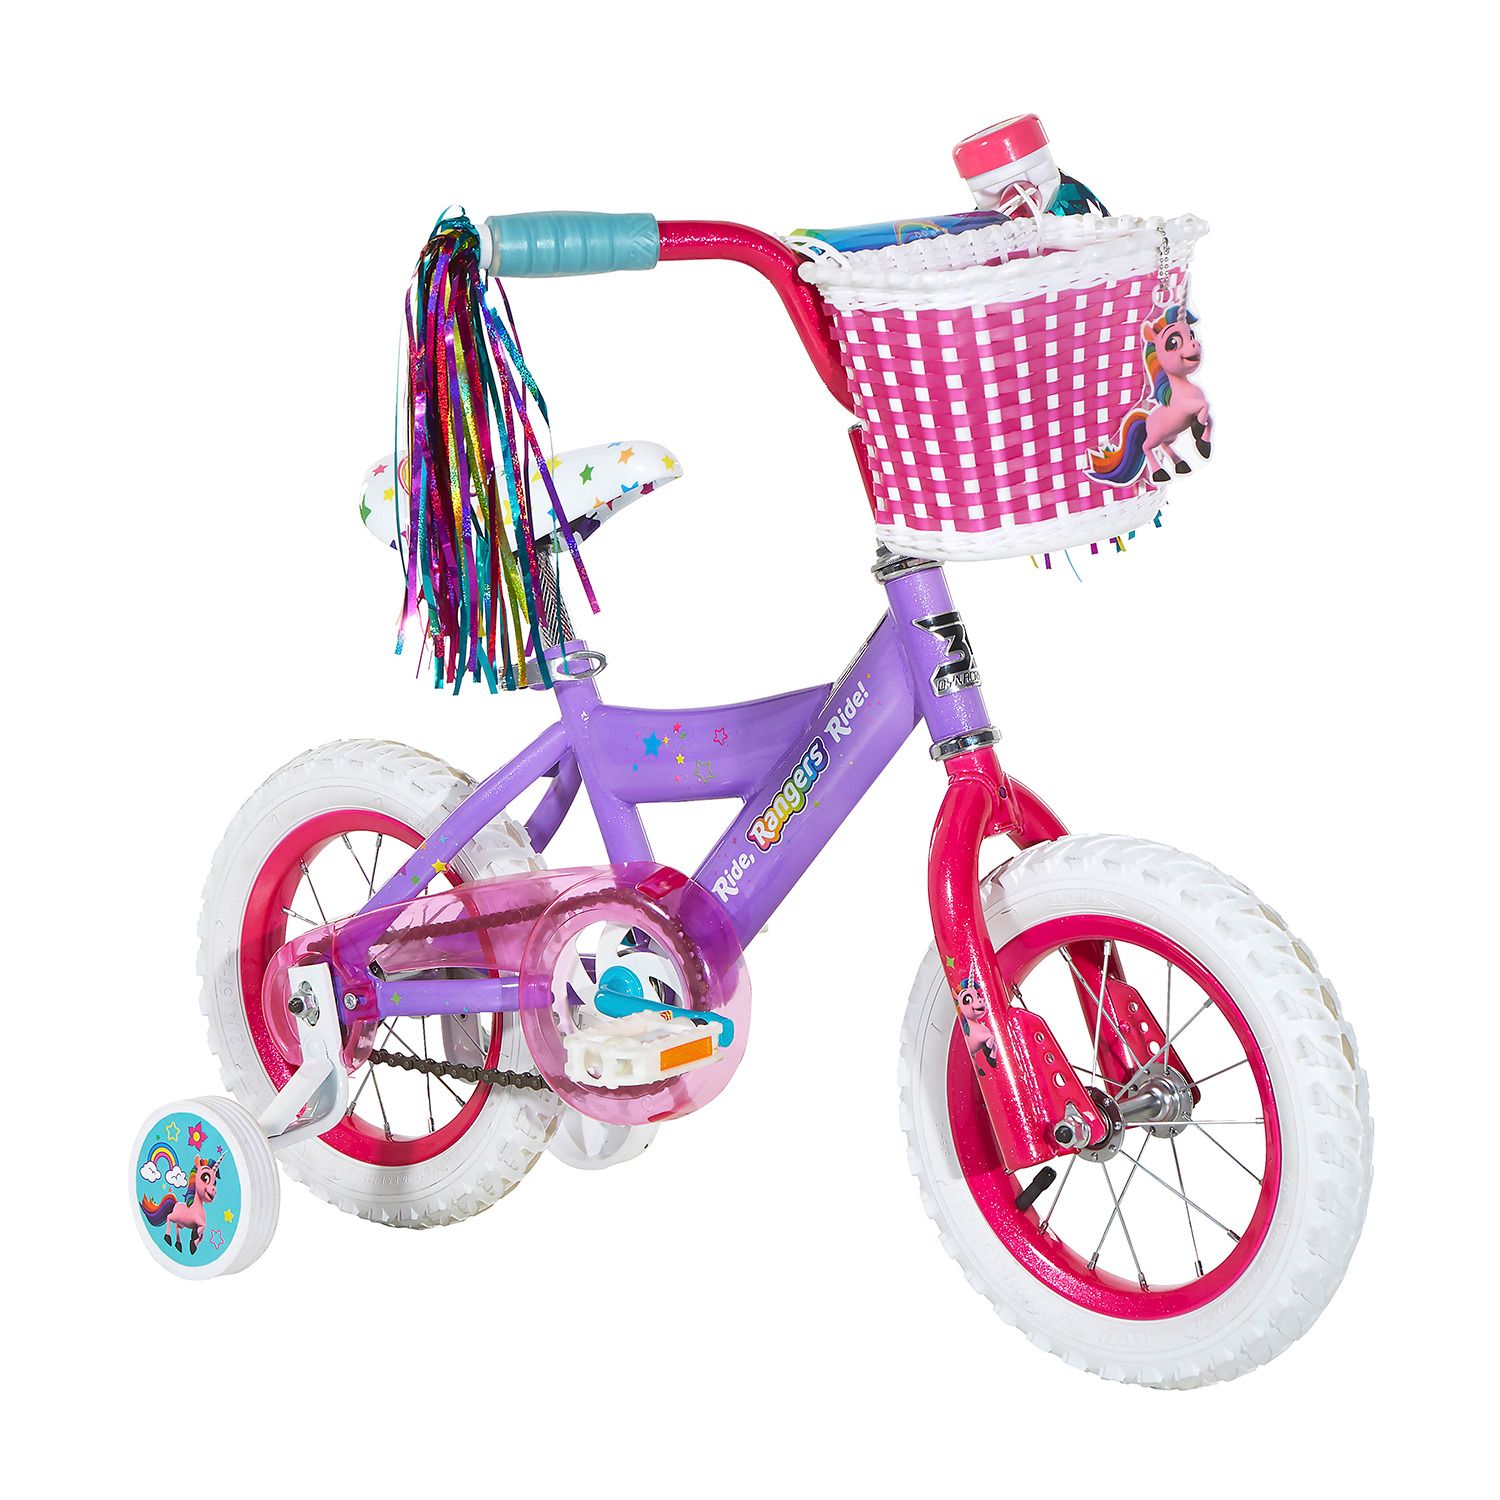 vilano girl's 16 inch bike with training wheels and basket